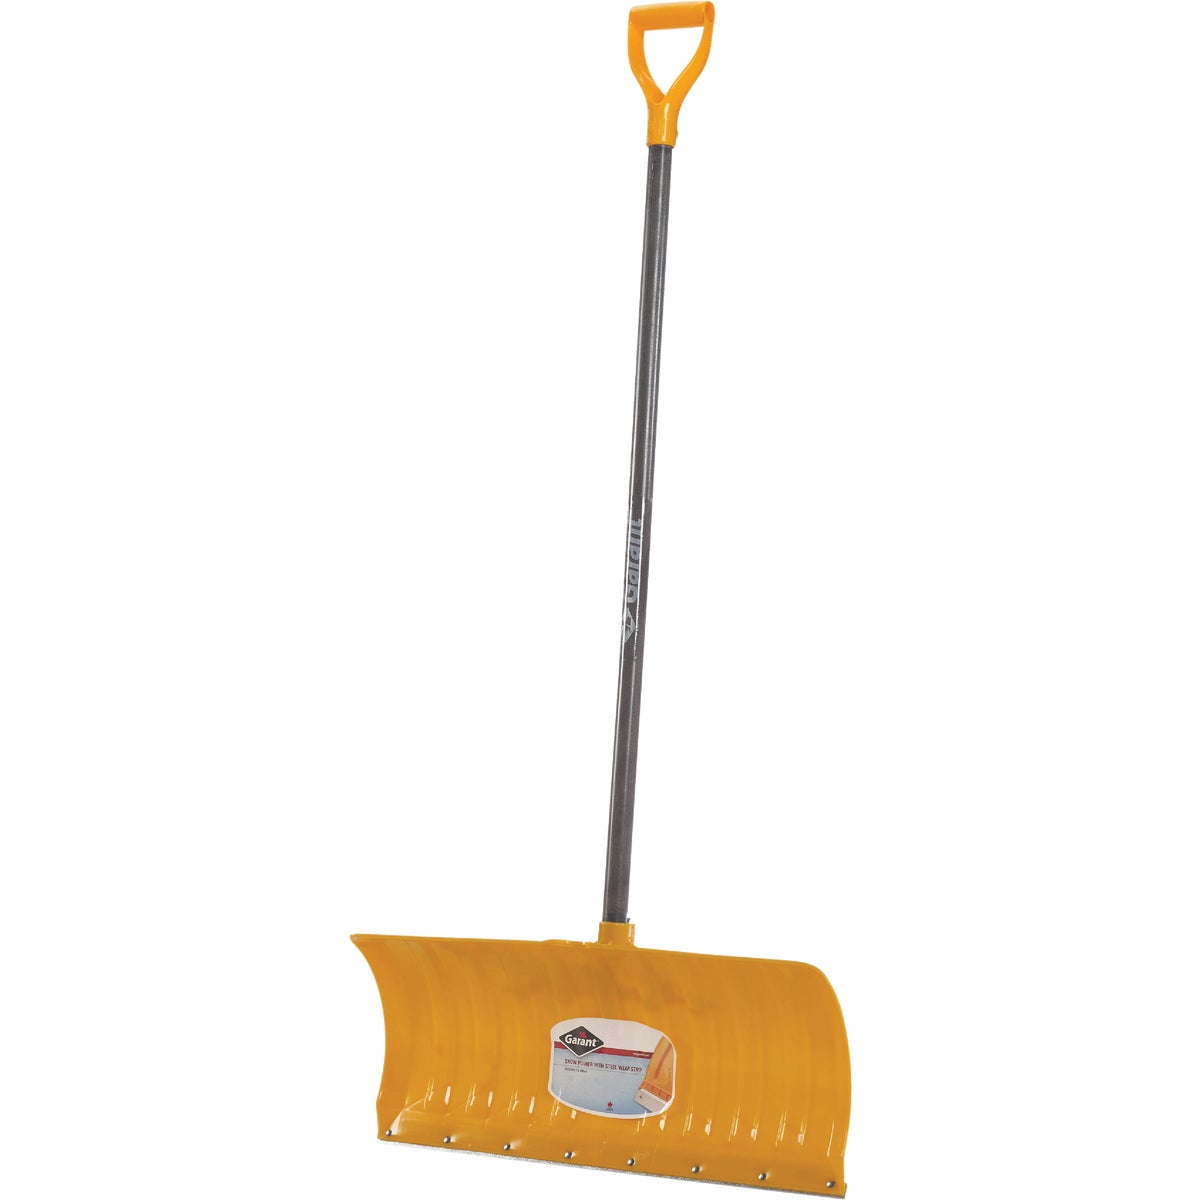 Item 704792, Alpine snow pusher features a 26 In. W. x 11 In. H.